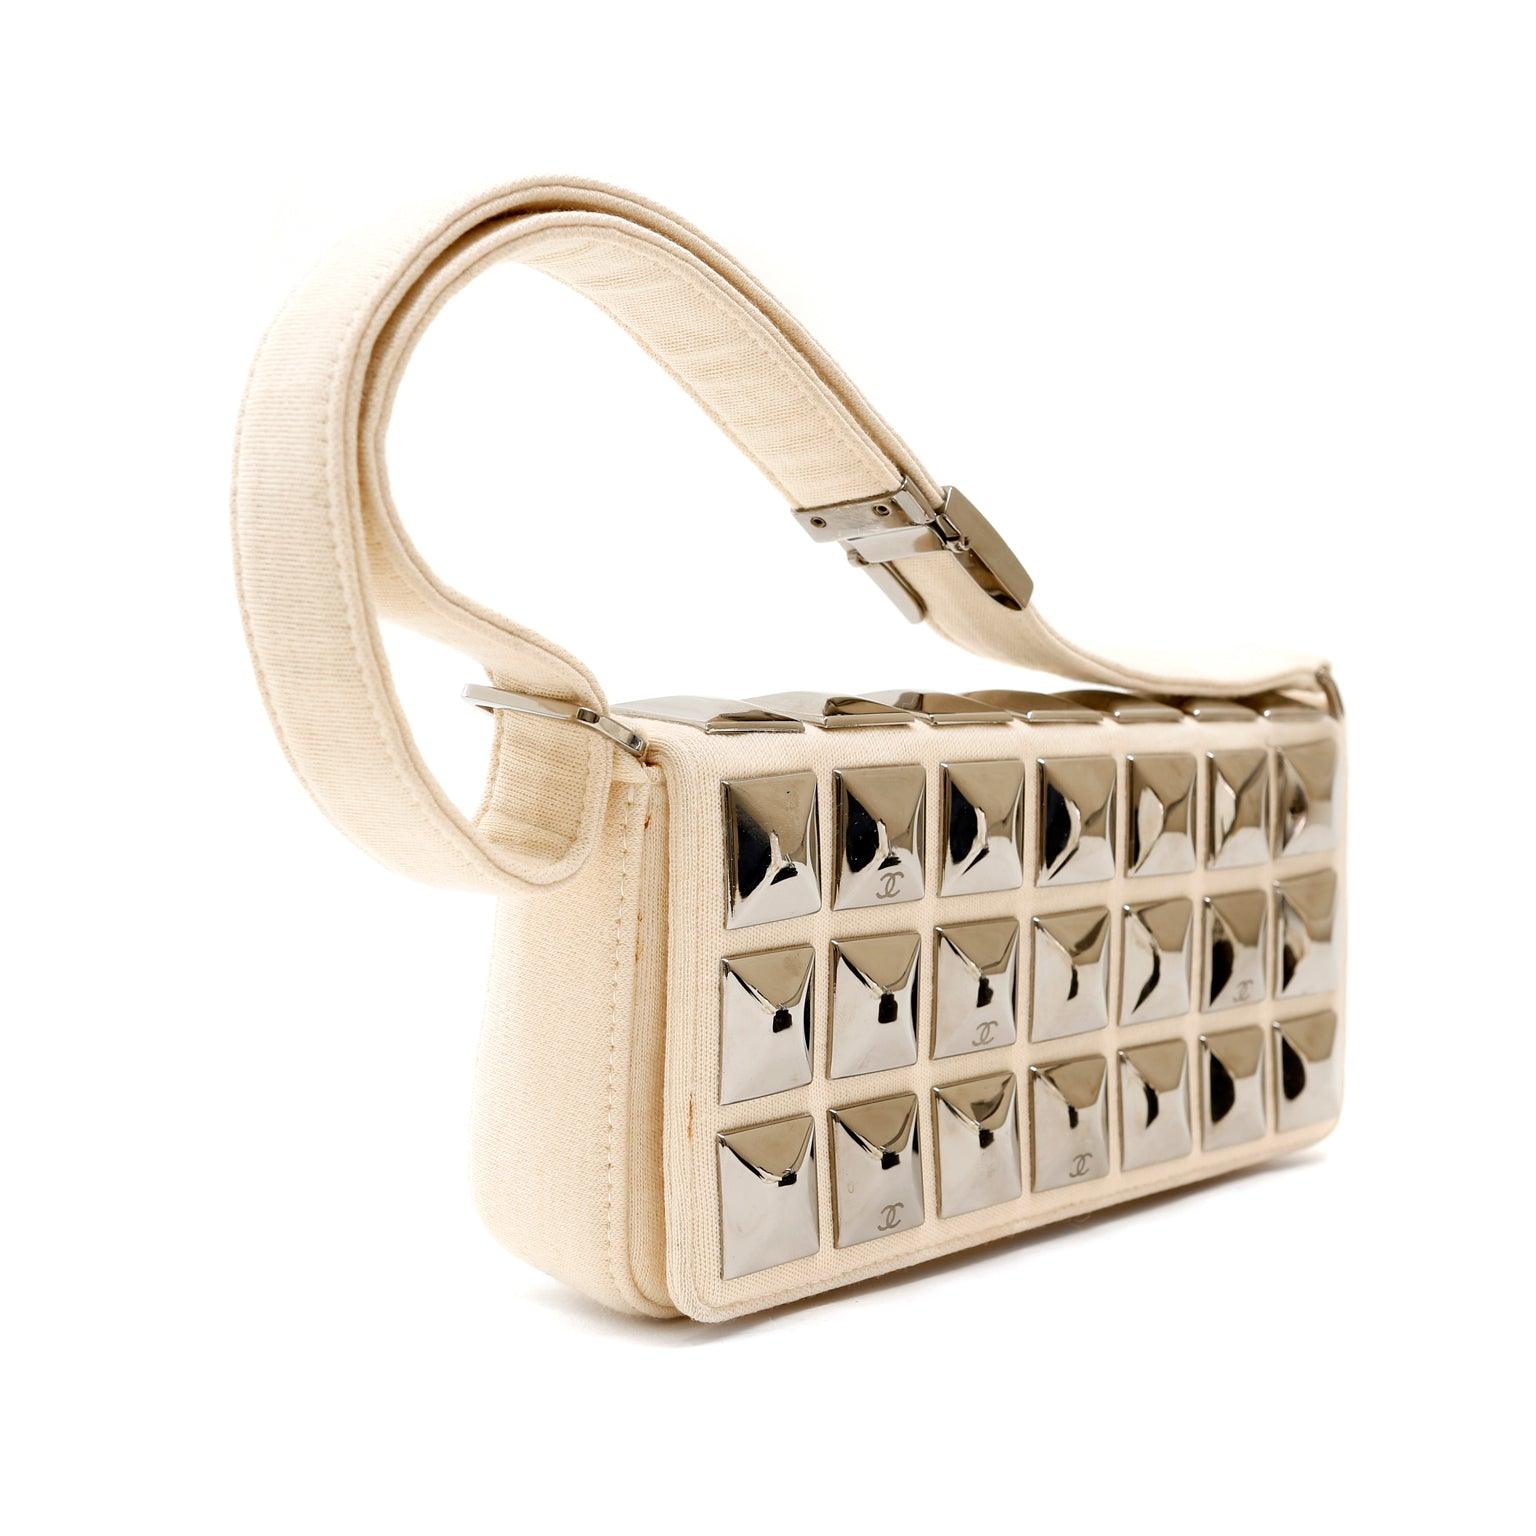 Chanel Ivory Jersey Evening Bag with Mirrored Pyramid Studs – Only